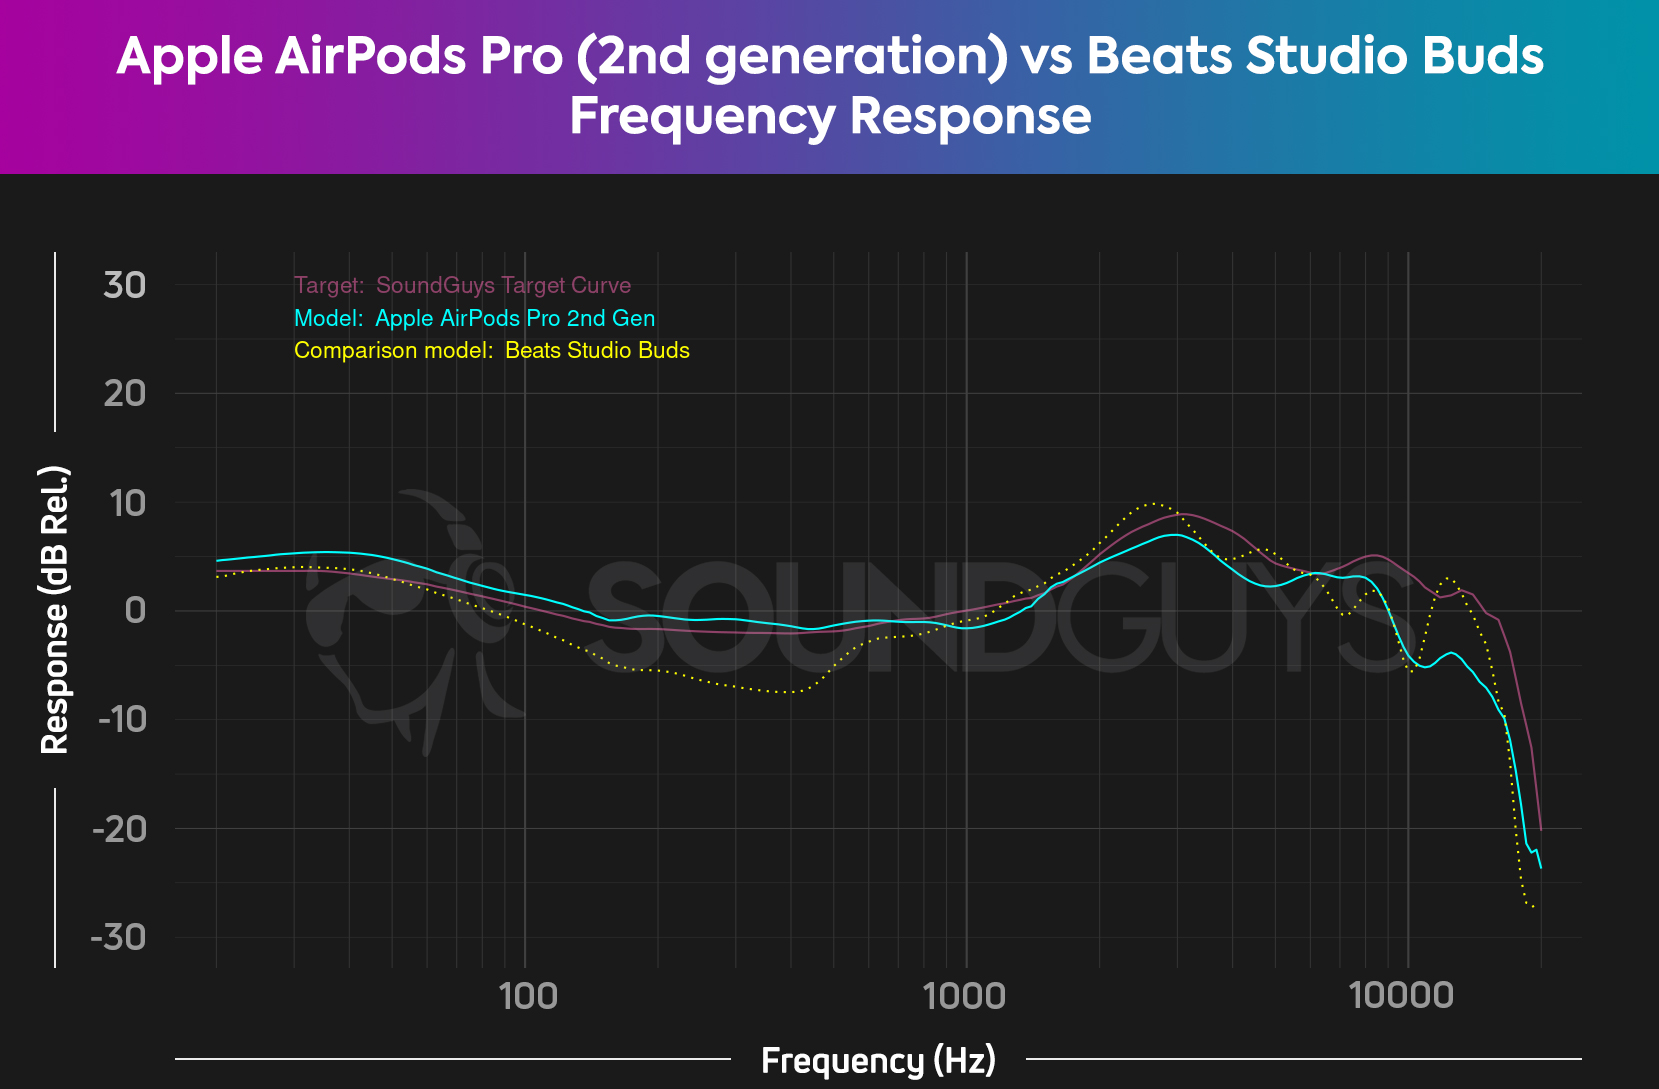 A chart compares the Apple AirPods Pro 2nd generation and Beats Studio Buds frequency responses, and the Apple earbuds have a more consistent output.